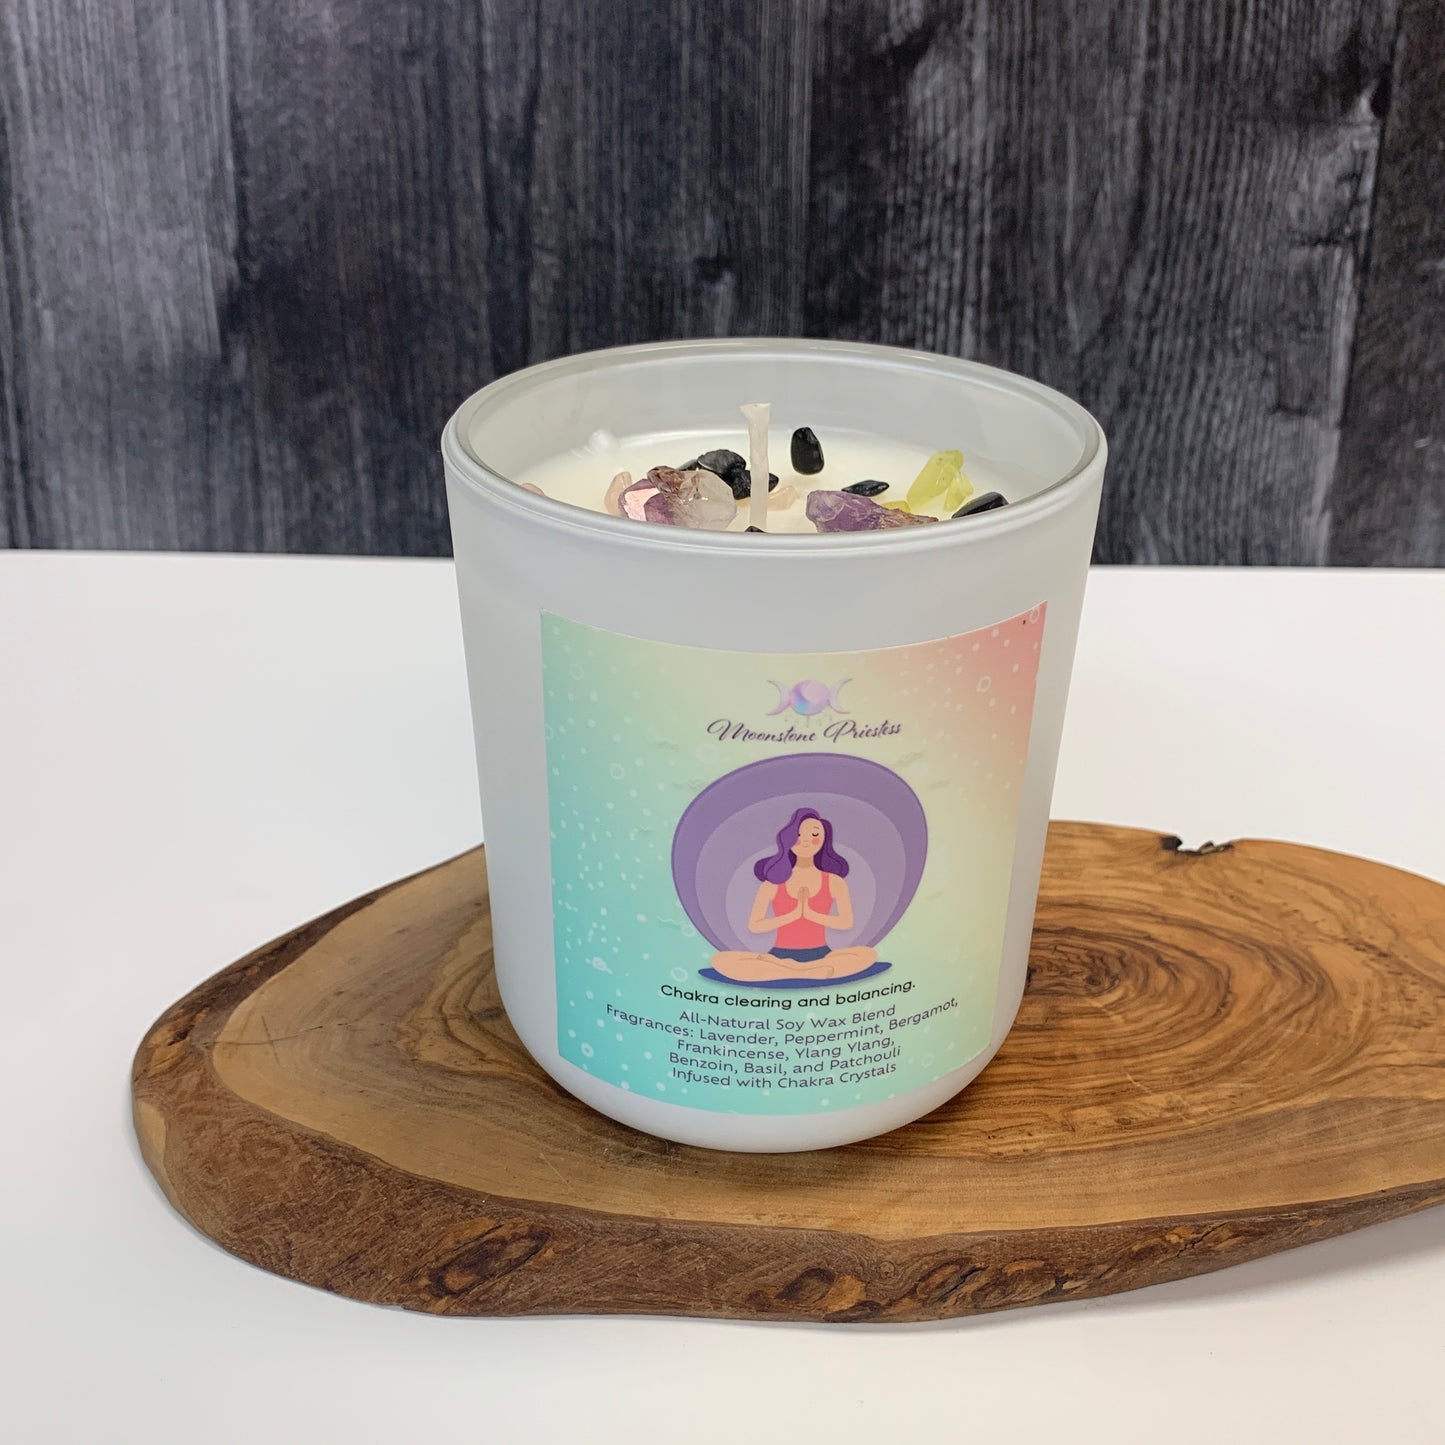 Chakra Bliss Candle with Chakra Crystals